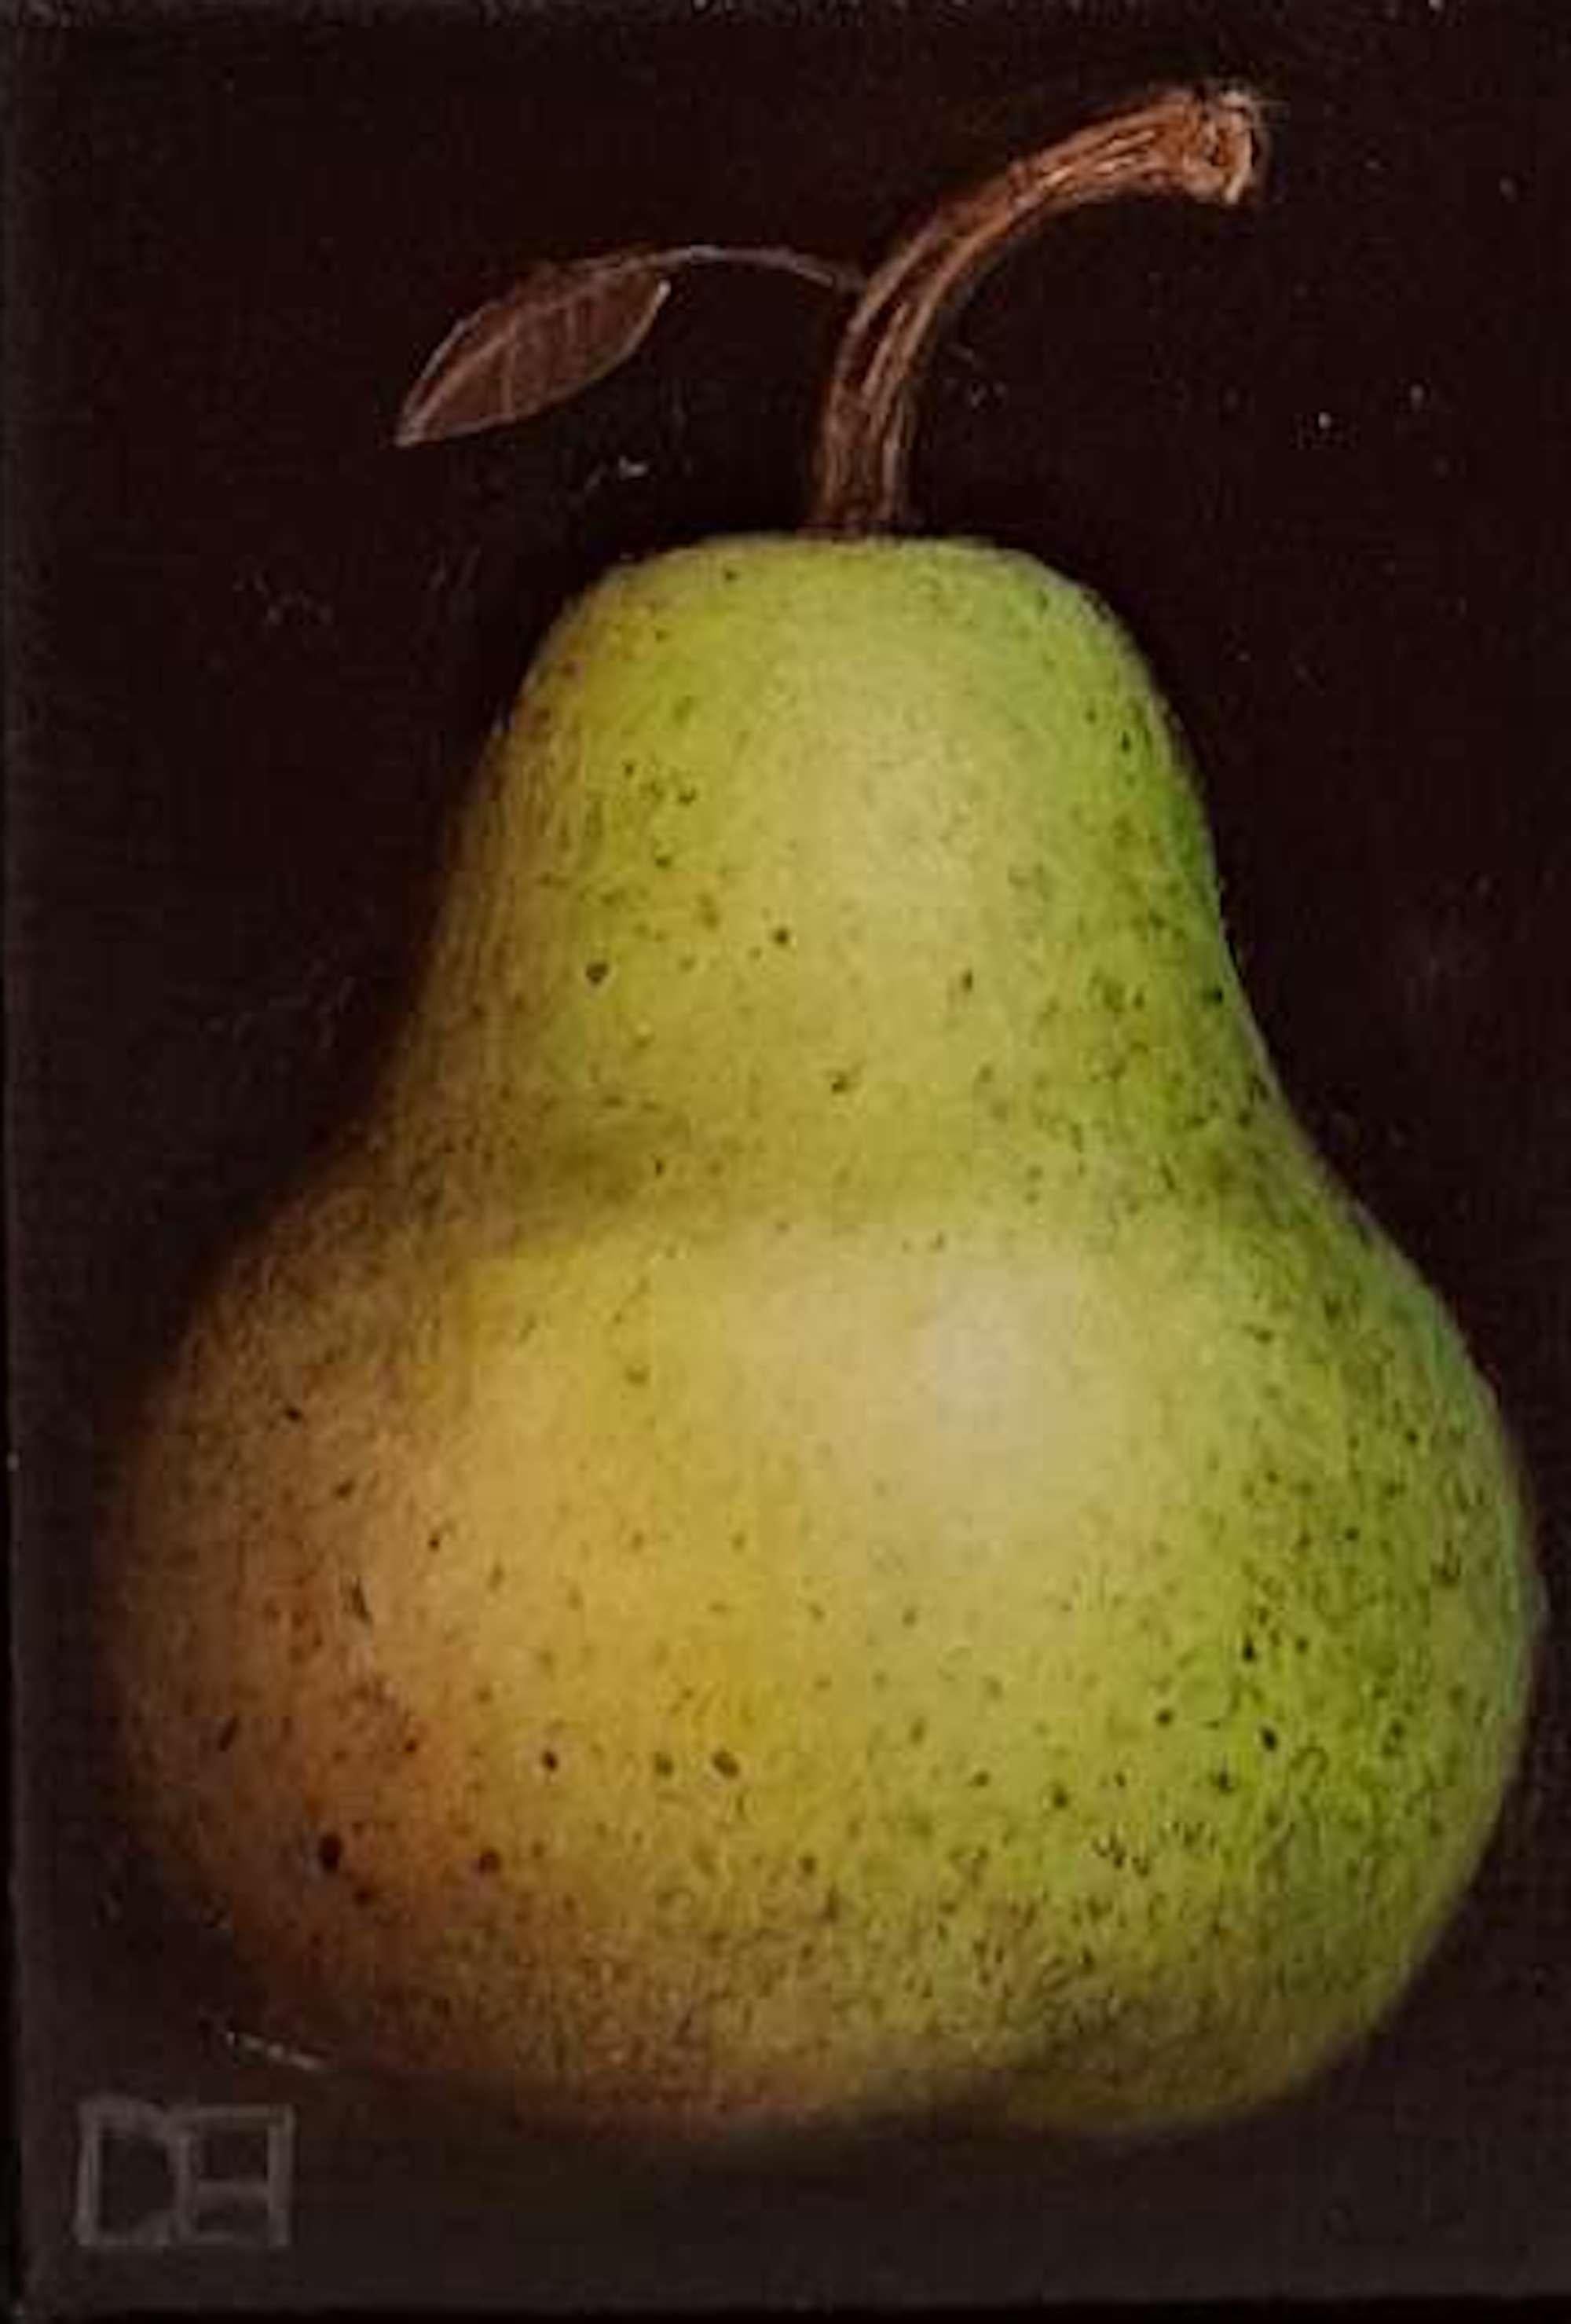 Pocket Green Speckled Pear [2023]
original
Oil paint on canvas
Image size: H:7 cm x W:5 cm
Complete Size of Unframed Work: H:7 cm x W:5 cm x D:2cm
Frame Size: H:17 cm x W:15 cm x D:5cm
Sold Framed
Please note that insitu images are purely an